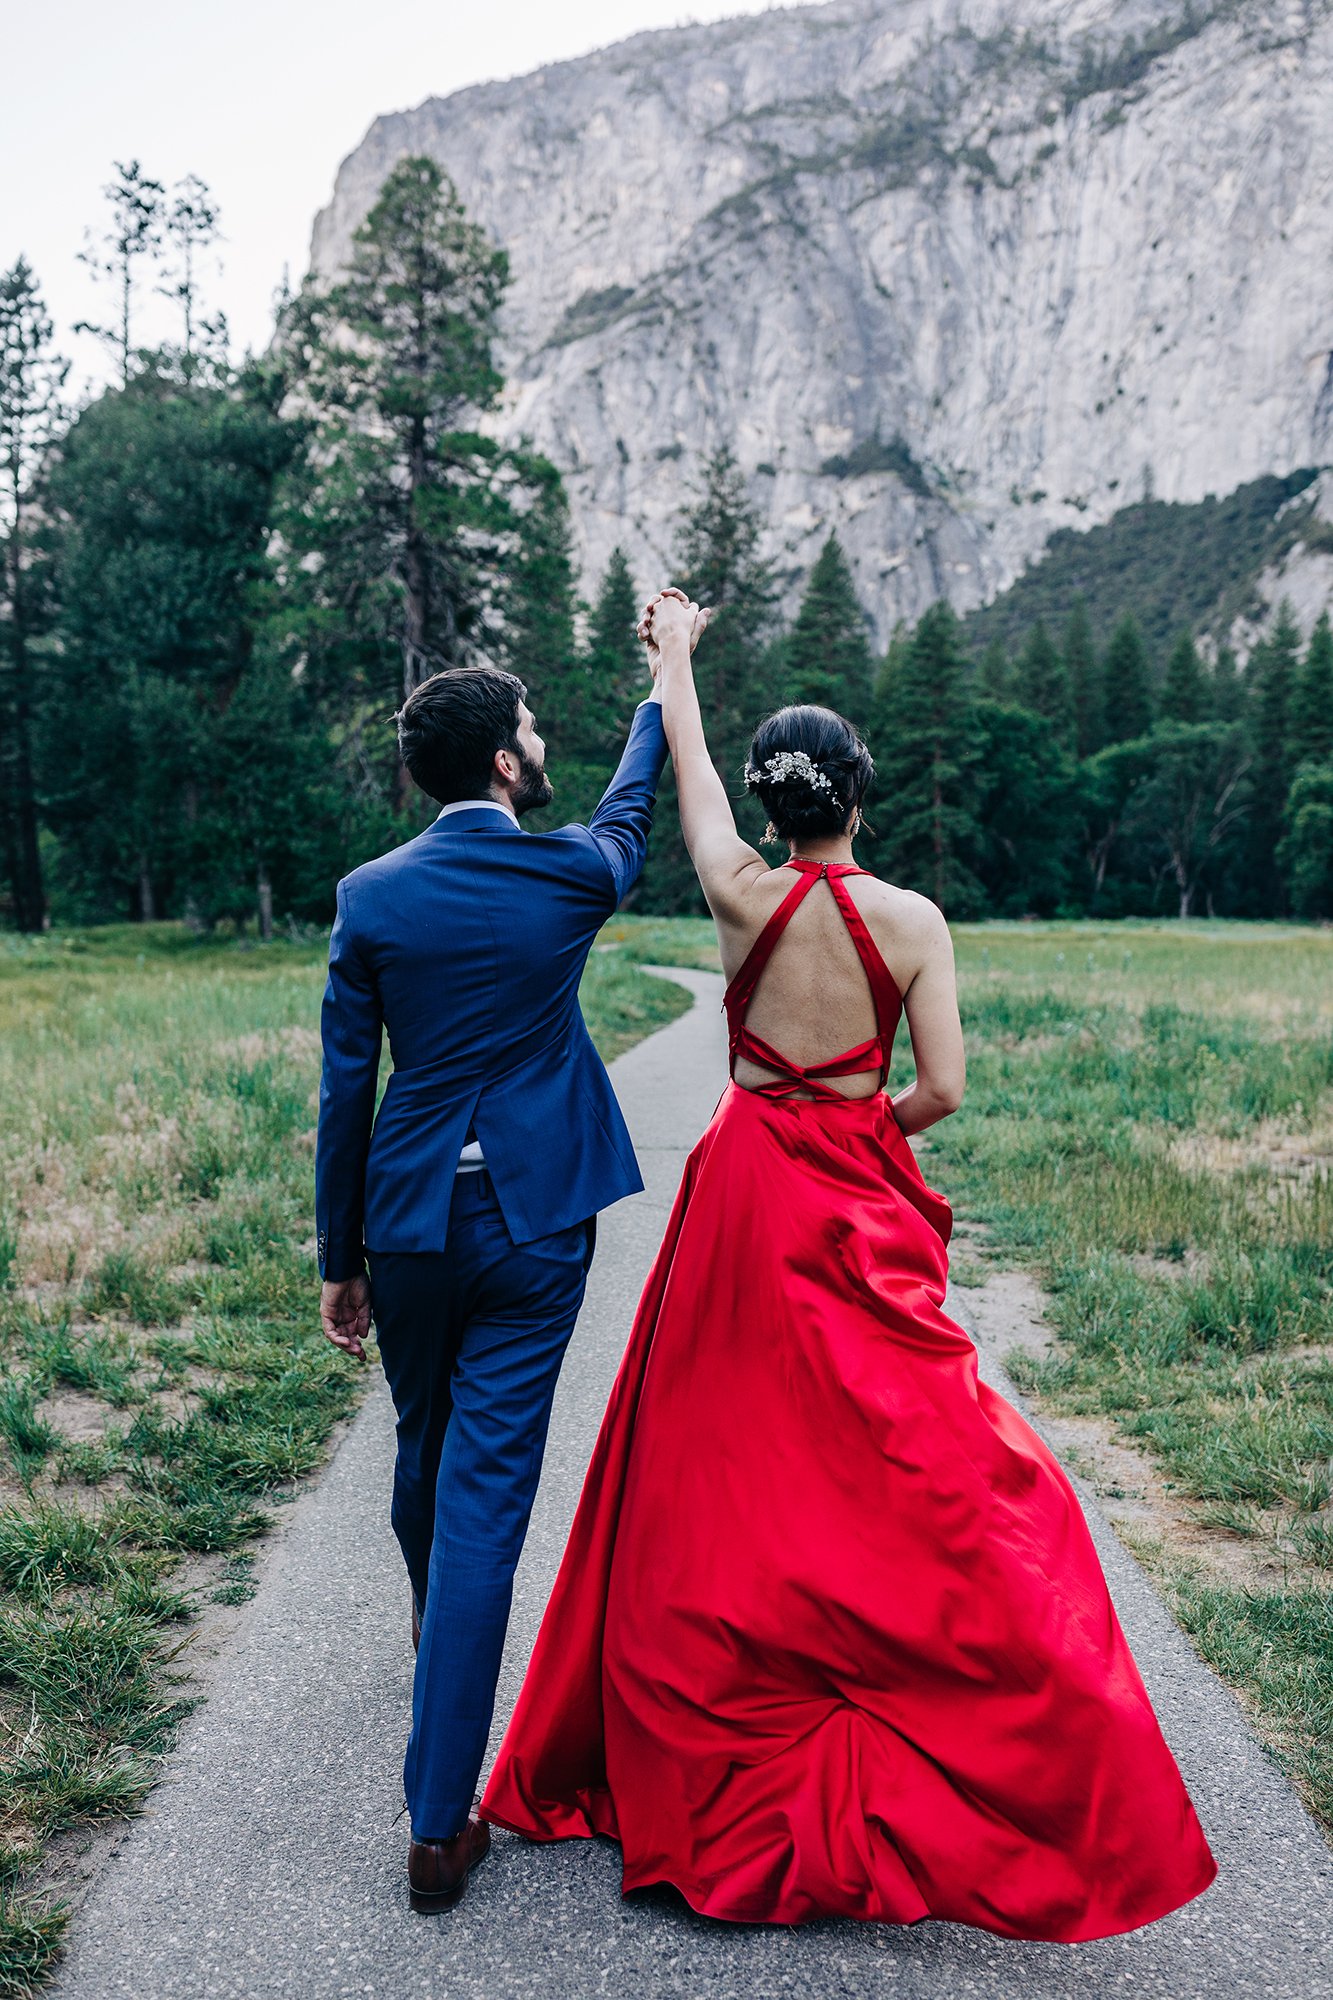 Yooree and Jarrod walk together during their elopement in Yosemite National Park.